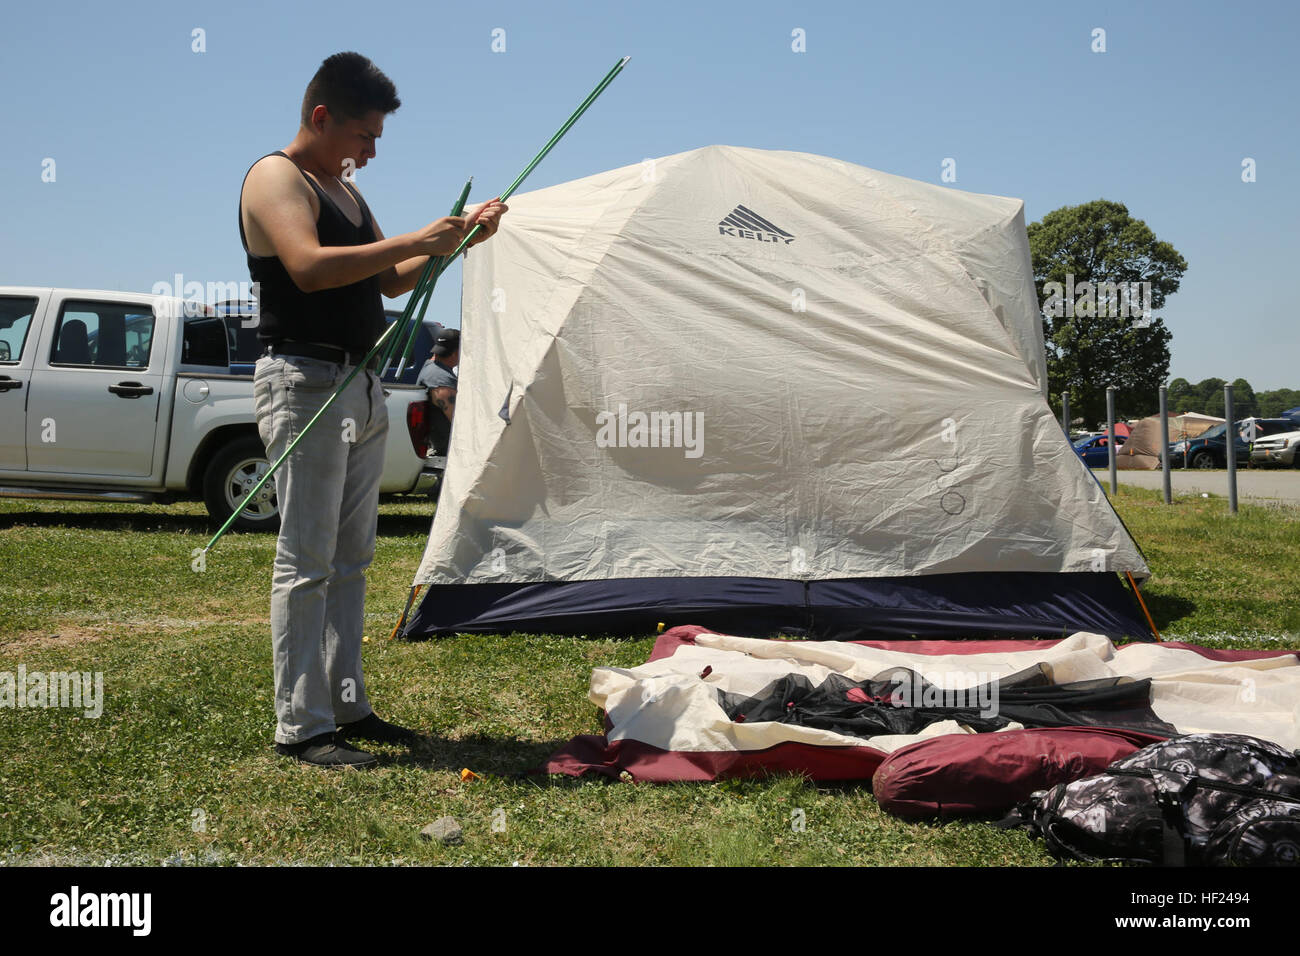 Pfc. David PiñaHuitzil puts his tent together May 2 outside of the Monster Energy's Carolina Rebellion. More than 20 Marines and Sailors with the Single Marine Program at Marine Corps Air Station Cherry Point, N.C. we able to view bands like Five Finger Death Punch and Avenged Sevenfold. PiñaHuitzil is an adminstrative clerk with Headquarters and Headquarters Squadron. Marines, Sailors rock out at Carolina Rebellion 140504-M-FR159-009 Stock Photo